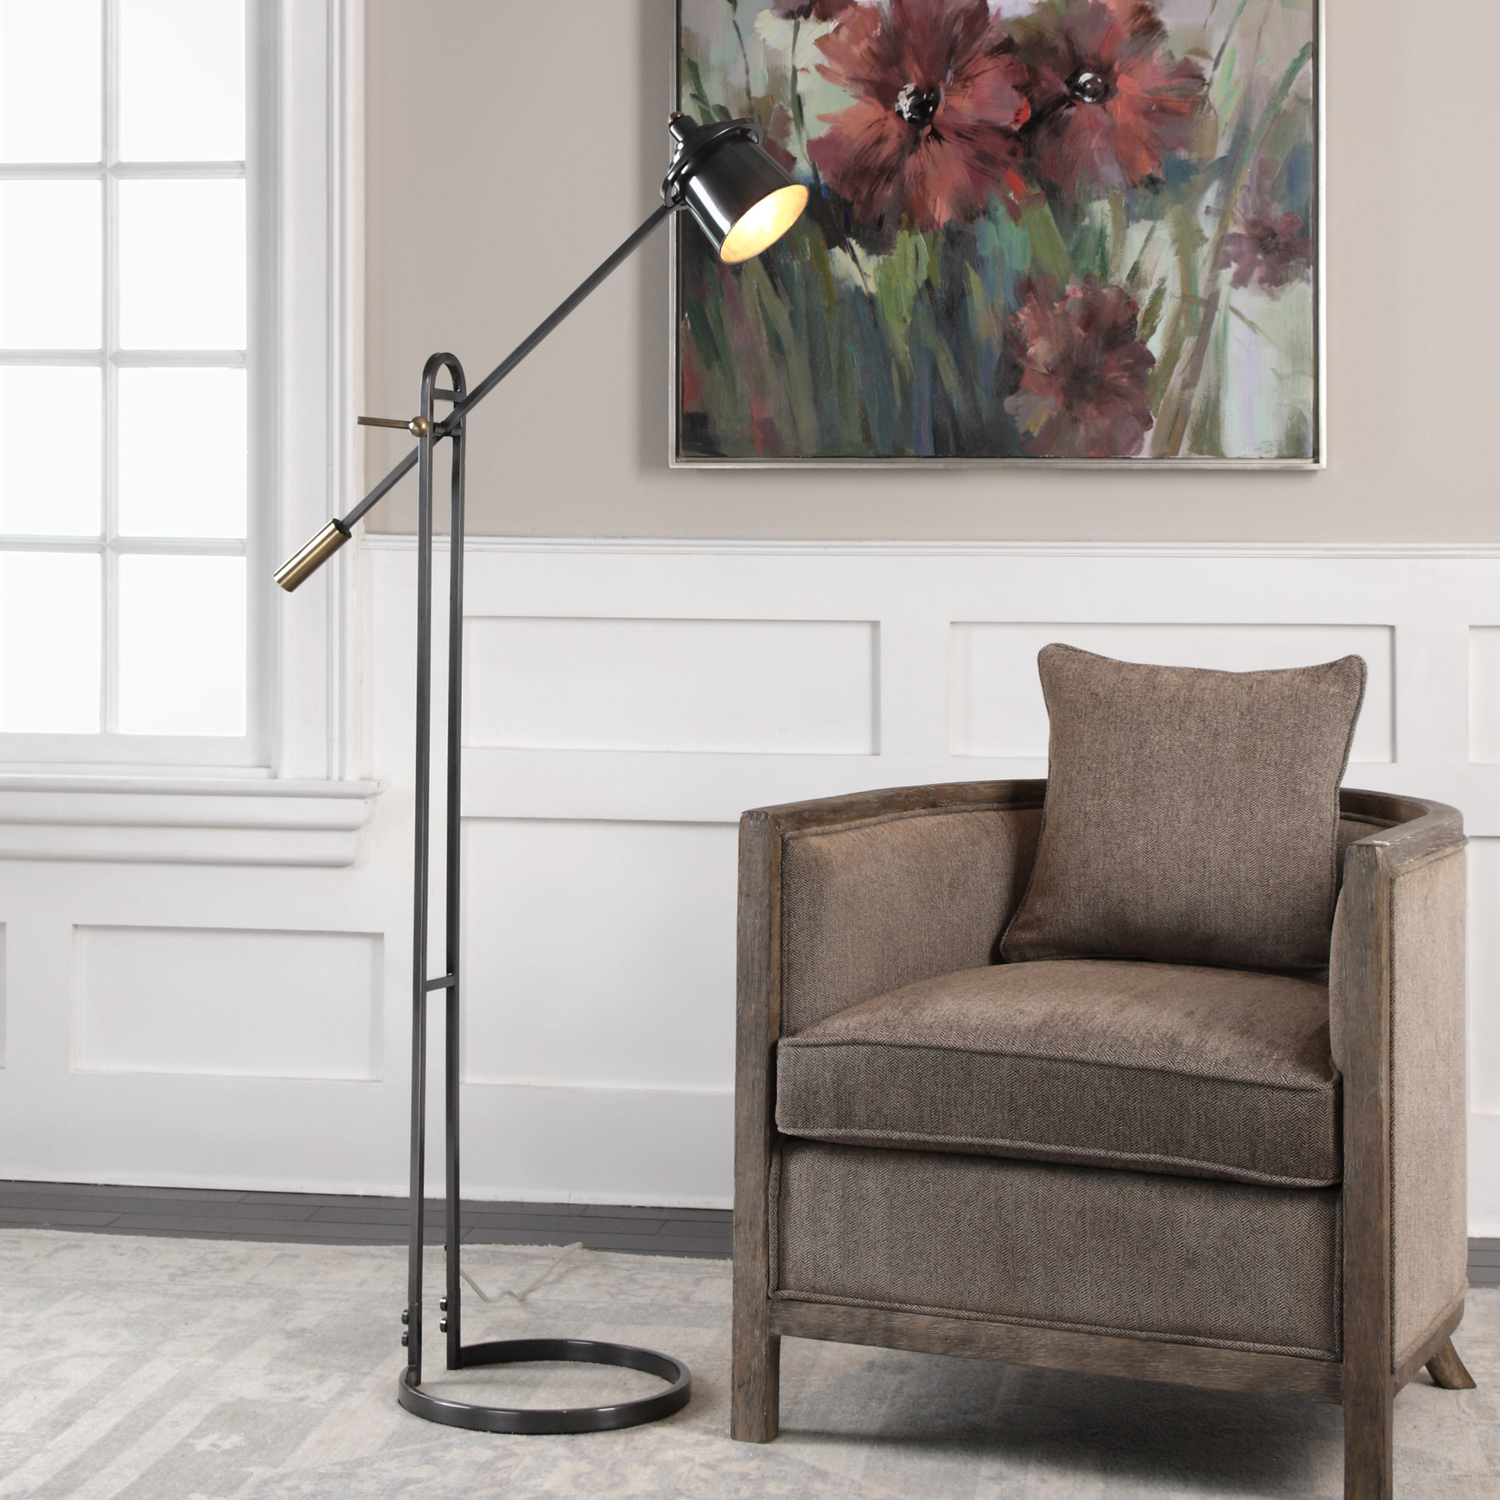 standing flower lamp Uttermost Dark Oil Rubbed Bronze Floor Lamp This Steel Lamp Features A Delicate Stature With A Wide Footprint, Finished In A Plated, Dark Oil Rubbed Bronze, Accented With Antique Brass Details. The Shade Arm Is Adjustable In Height And Shade Pivots Left And Right.